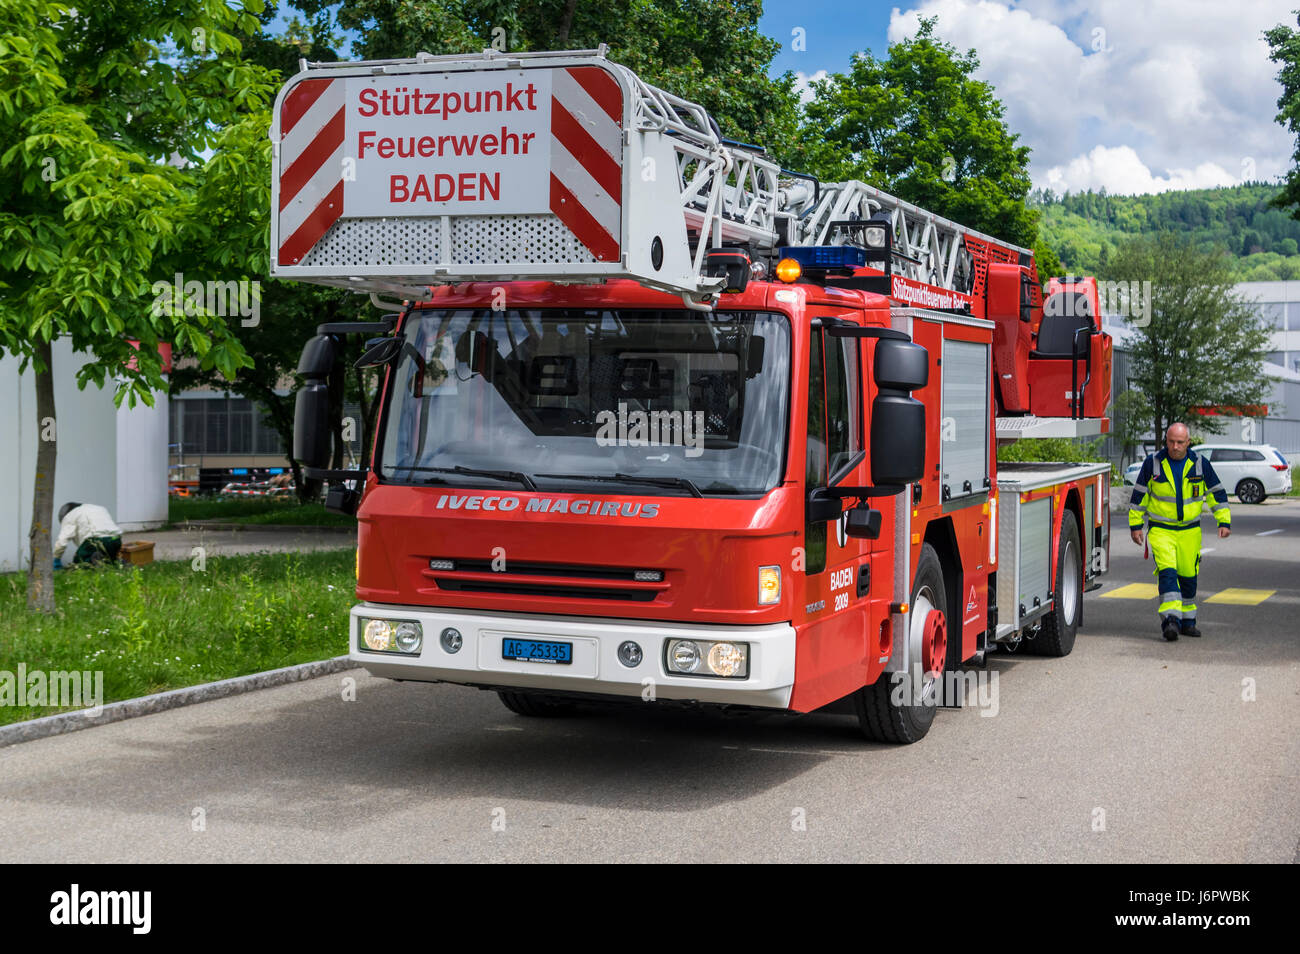 Iveco Magirus 160E30 turntable ladder truck of a Swiss fire brigade. Ladder and platform retracted. Fireman standing next to the vehicle. Stock Photo